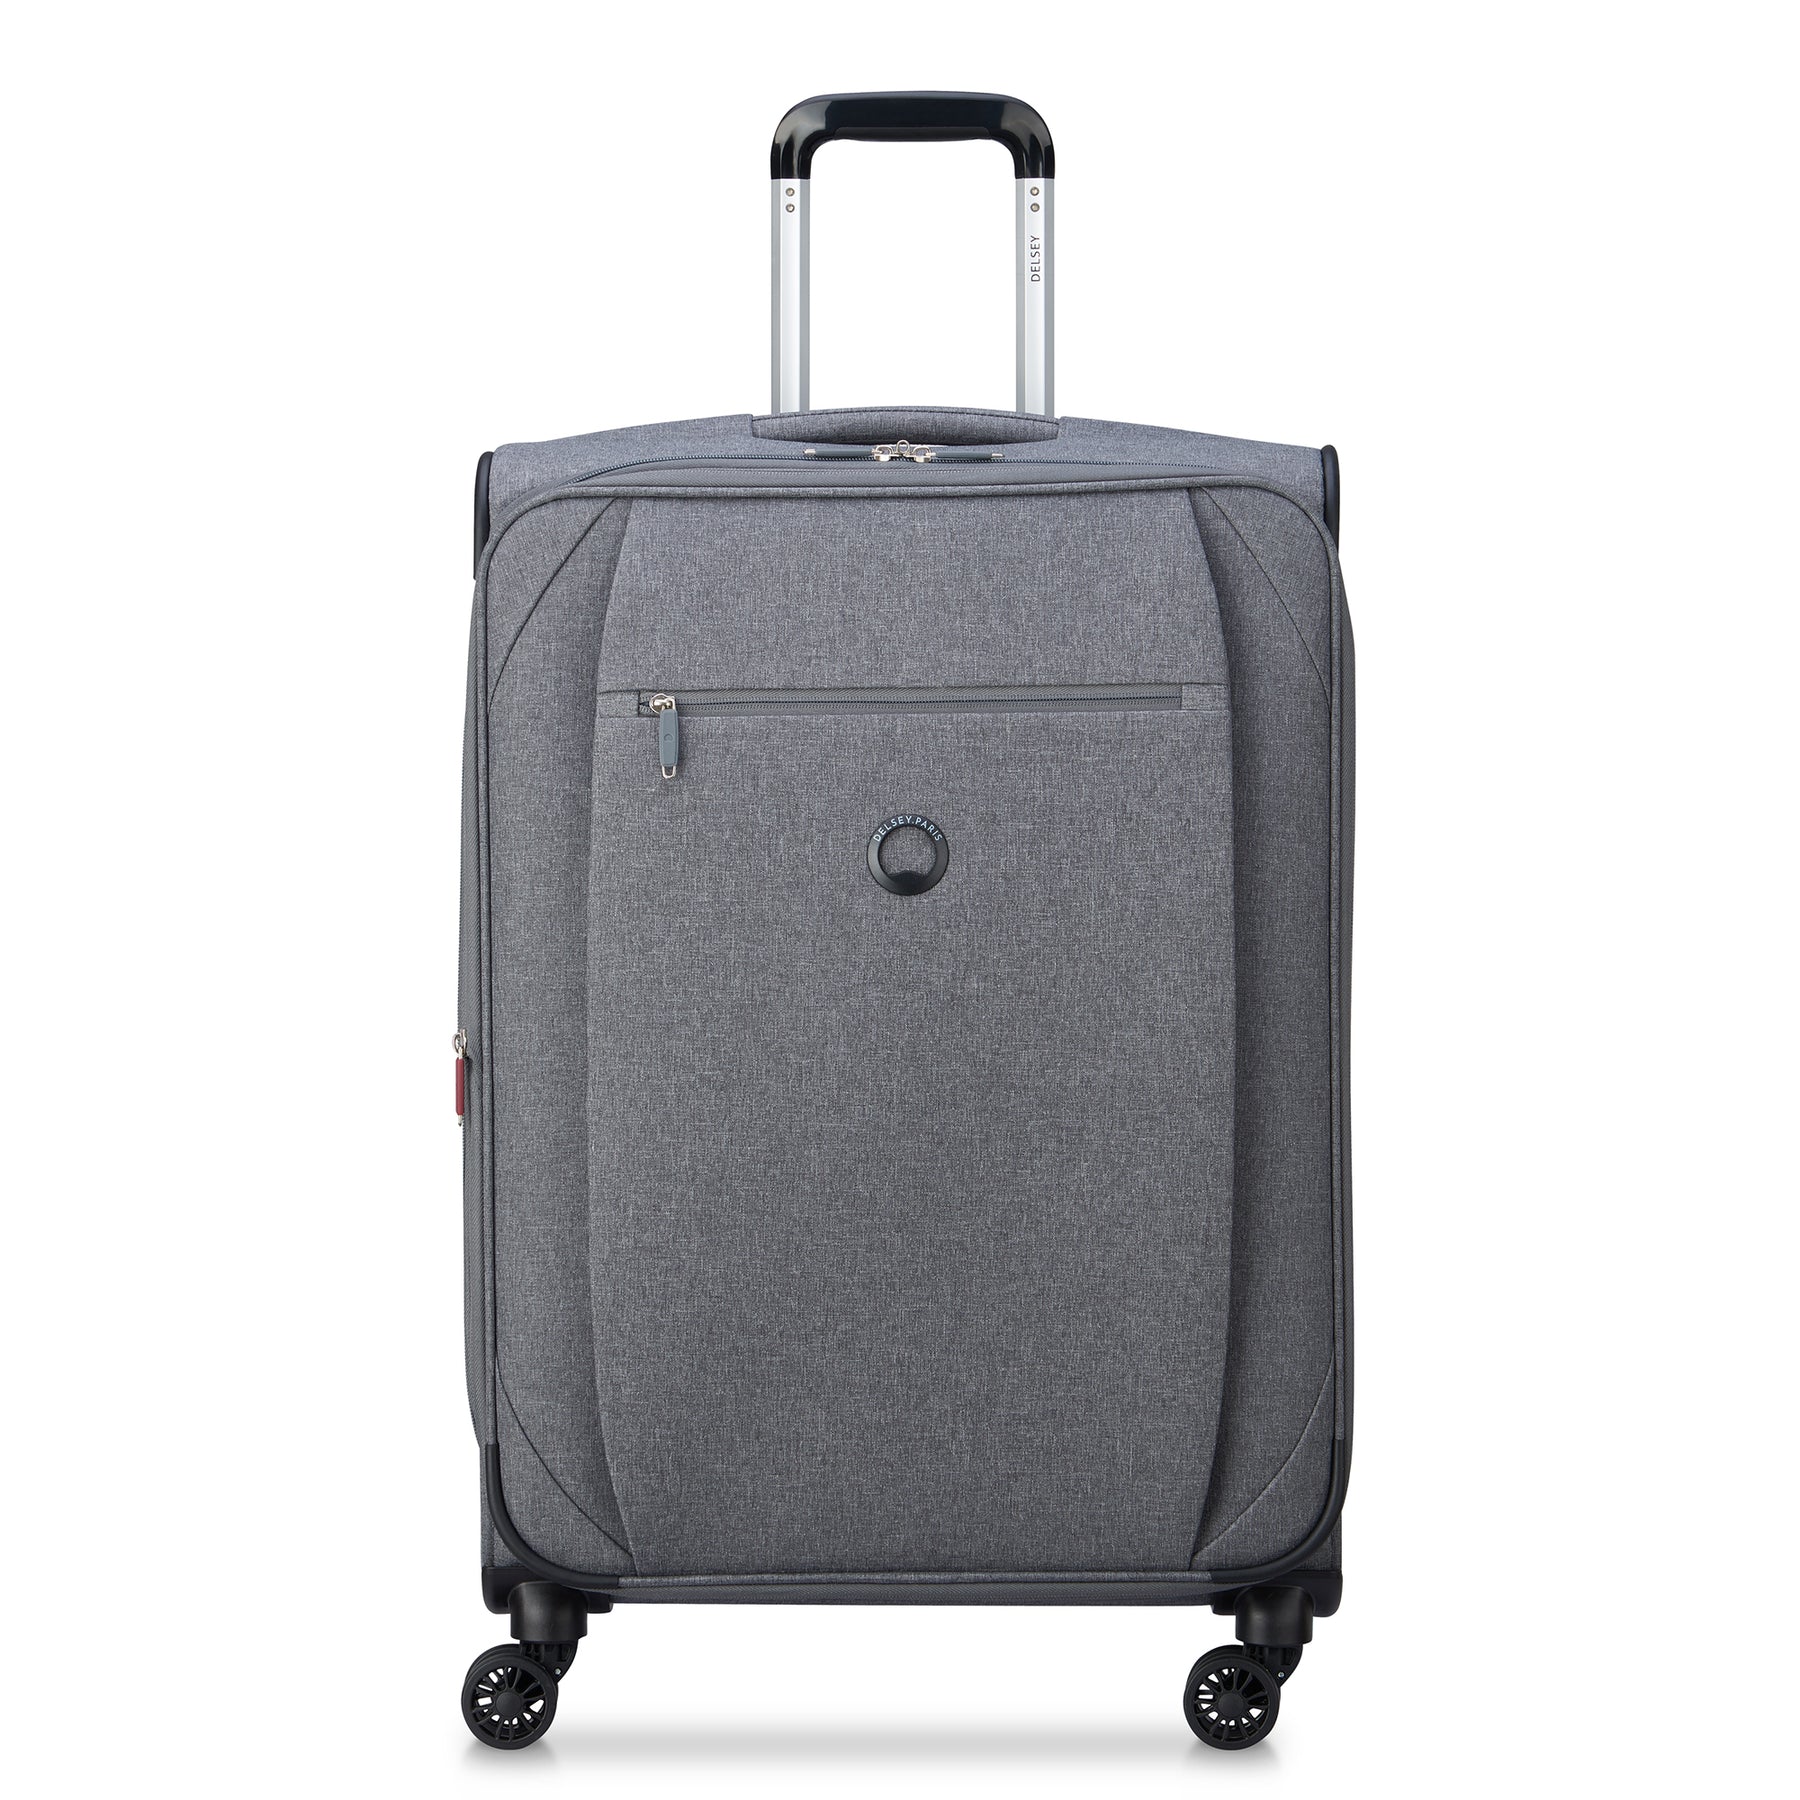 Delsey AERO 19” Carry-on Review: Luxury at a Low Price